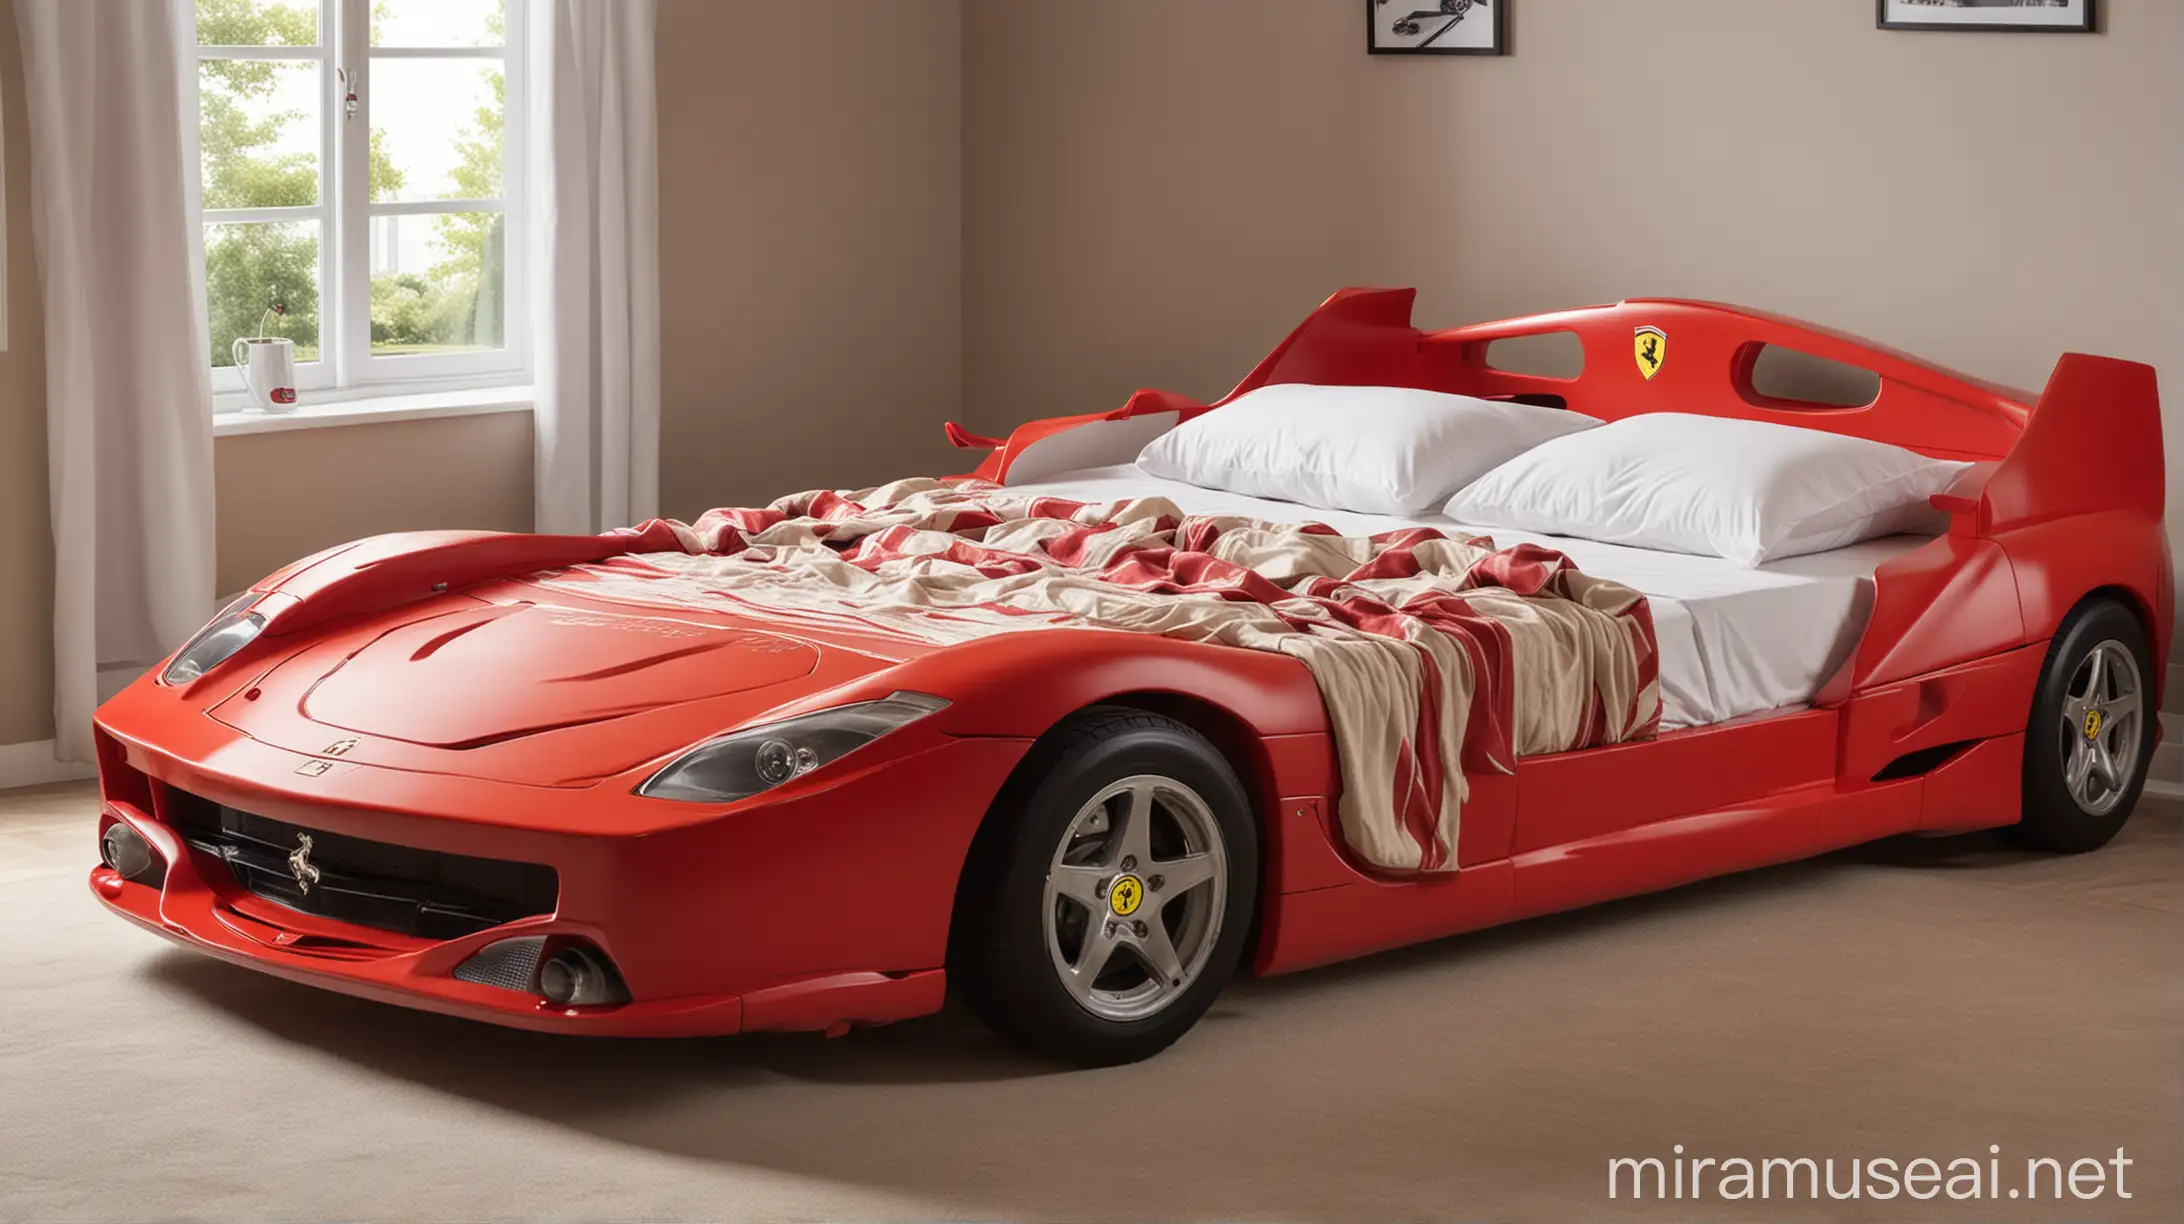 Double bed in the shape of a ferrari car